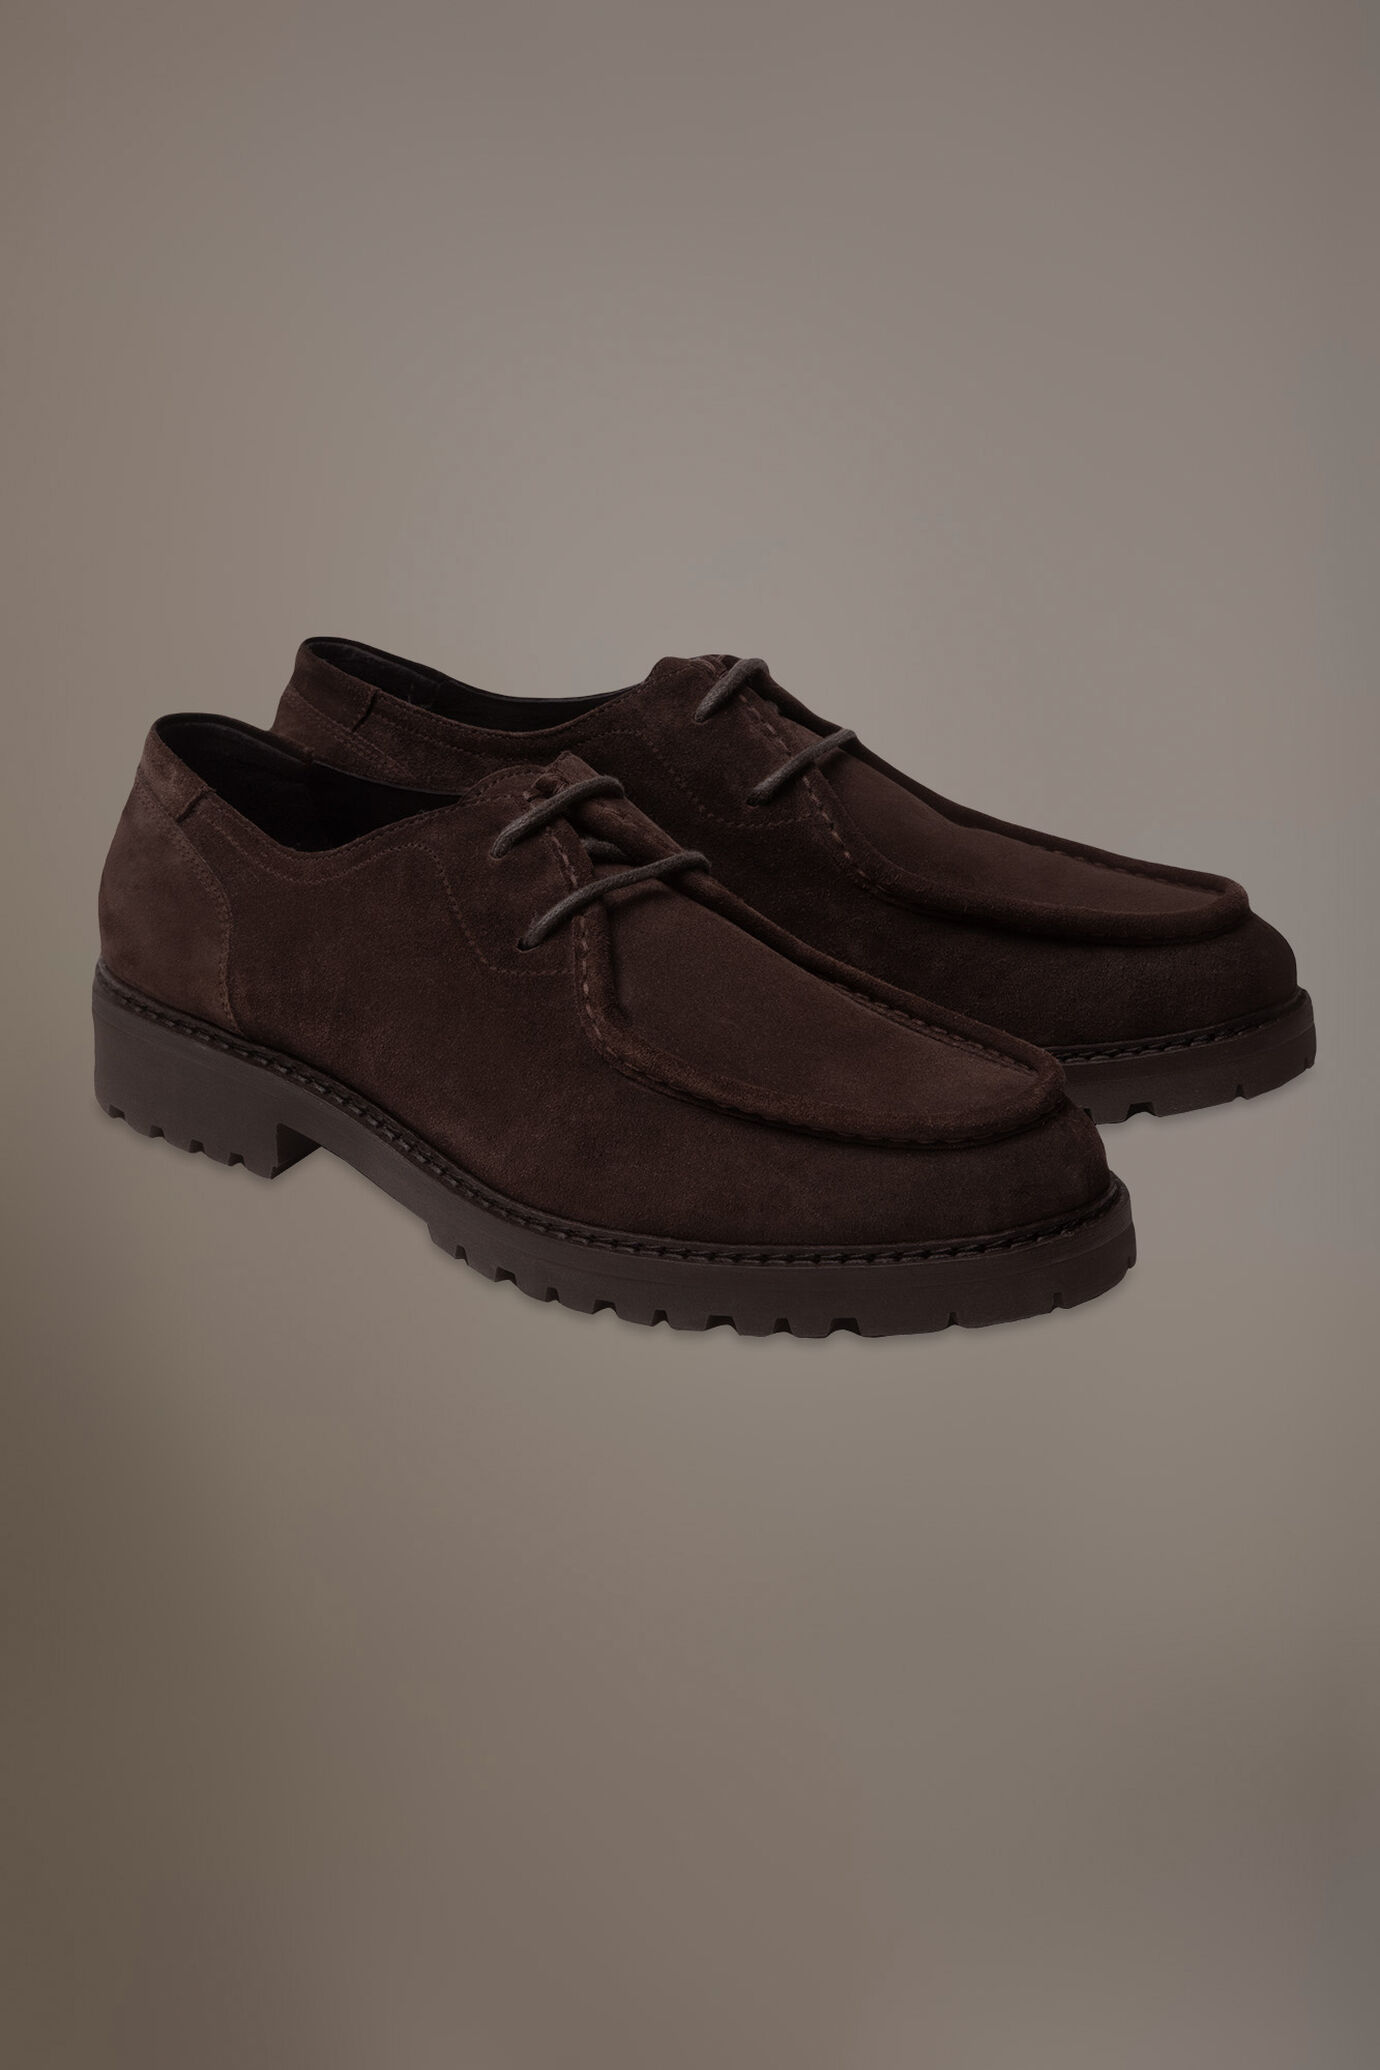 Ranger shoes - 100% leather - suede